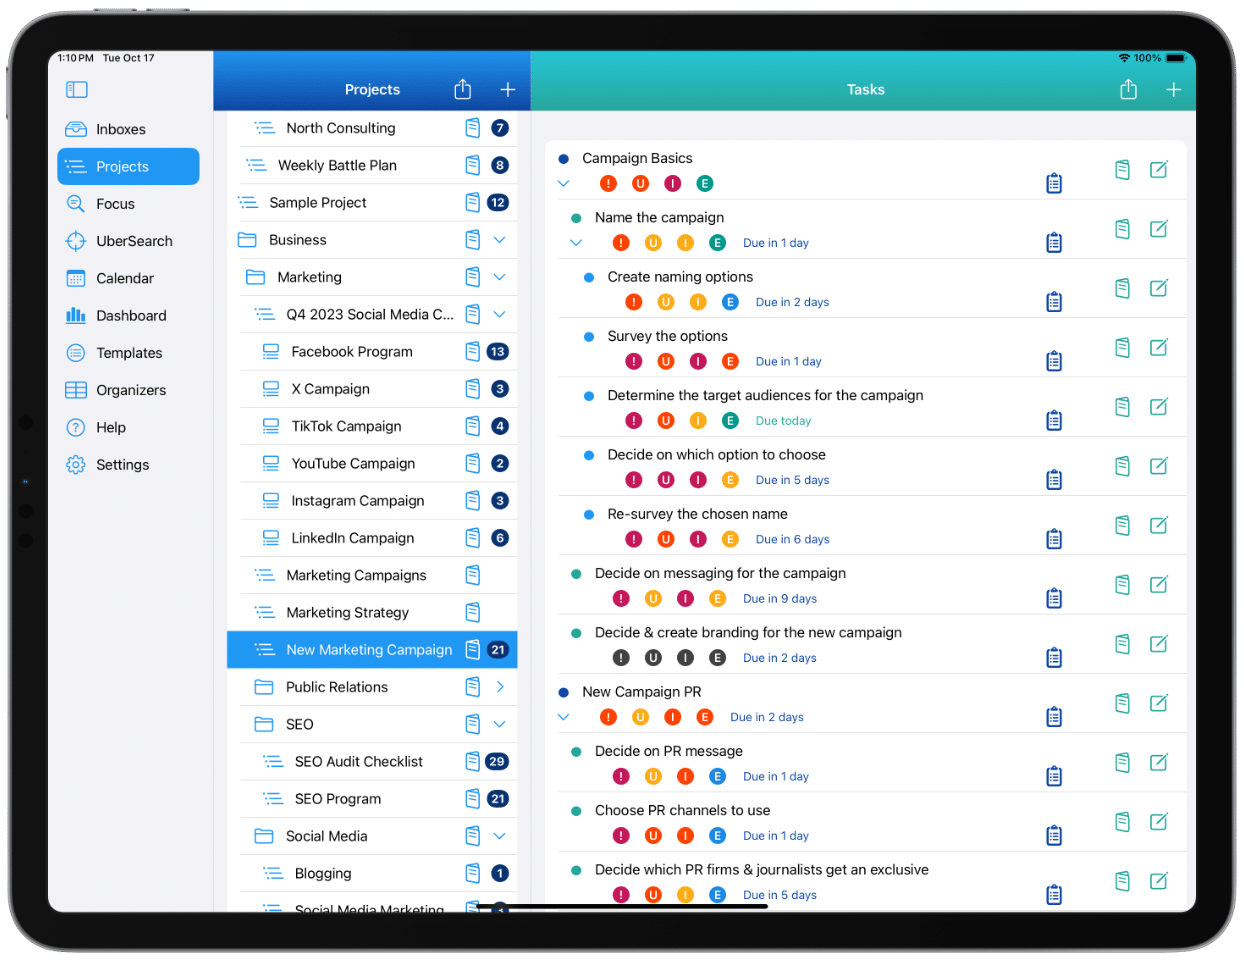 This image shows the Projects View on an iPad Pro. A project is selected with multiple nested levels of tasks and sub-tasks on an iPad Pro.